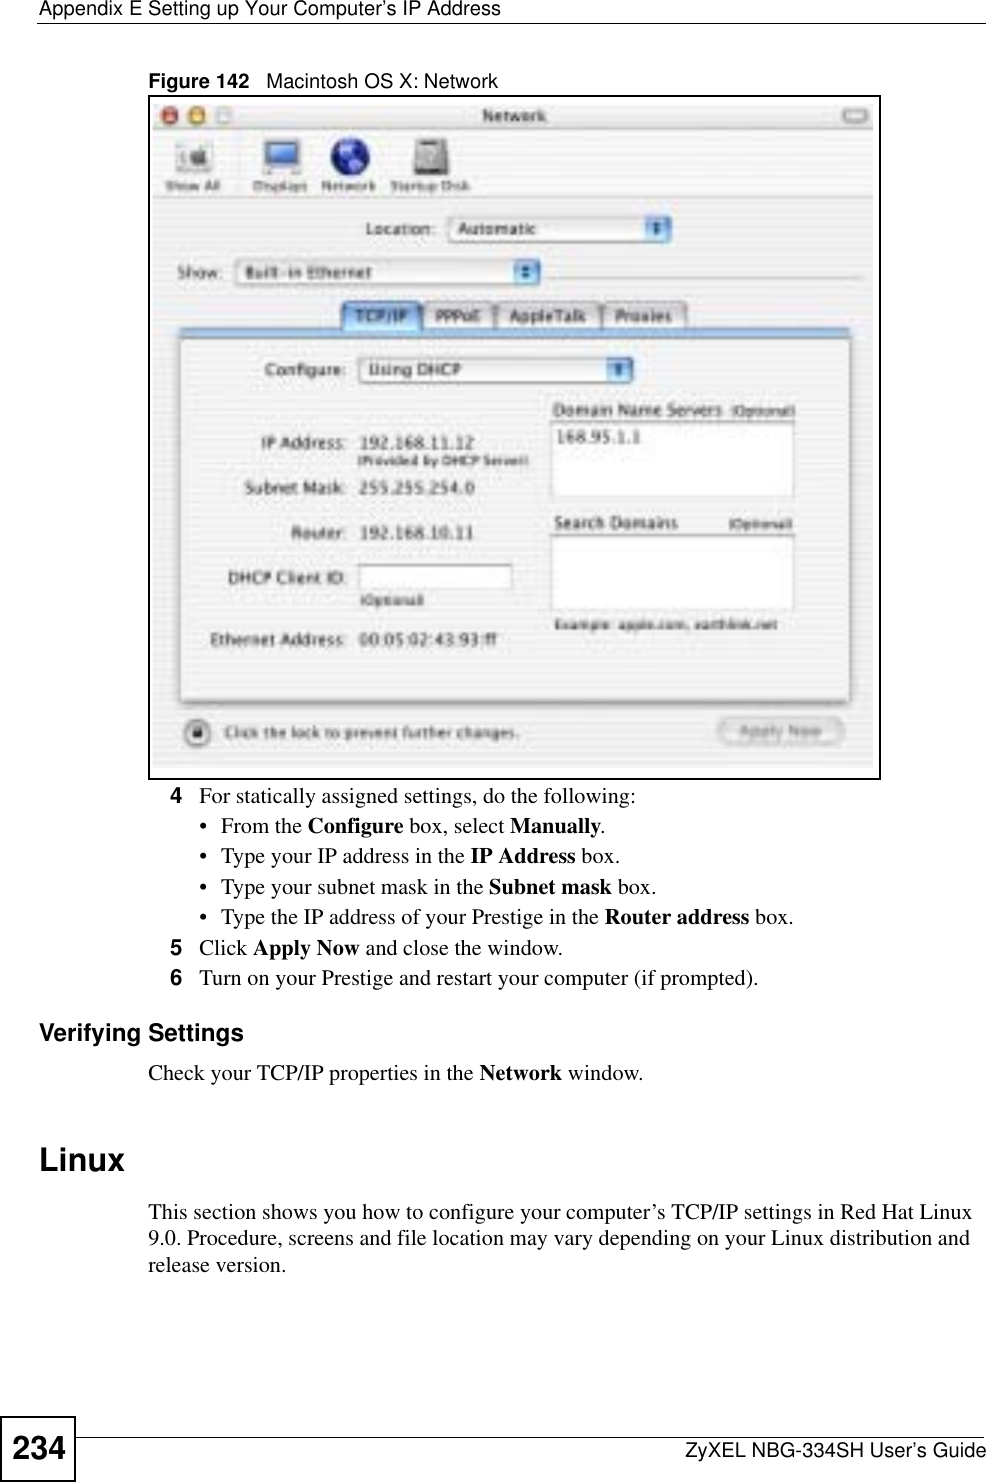 Appendix E Setting up Your Computer’s IP AddressZyXEL NBG-334SH User’s Guide234Figure 142   Macintosh OS X: Network4For statically assigned settings, do the following:•From the Configure box, select Manually.• Type your IP address in the IP Address box.• Type your subnet mask in the Subnet mask box.• Type the IP address of your Prestige in the Router address box.5Click Apply Now and close the window.6Turn on your Prestige and restart your computer (if prompted).Verifying SettingsCheck your TCP/IP properties in the Network window.LinuxThis section shows you how to configure your computer’s TCP/IP settings in Red Hat Linux 9.0. Procedure, screens and file location may vary depending on your Linux distribution and release version. 